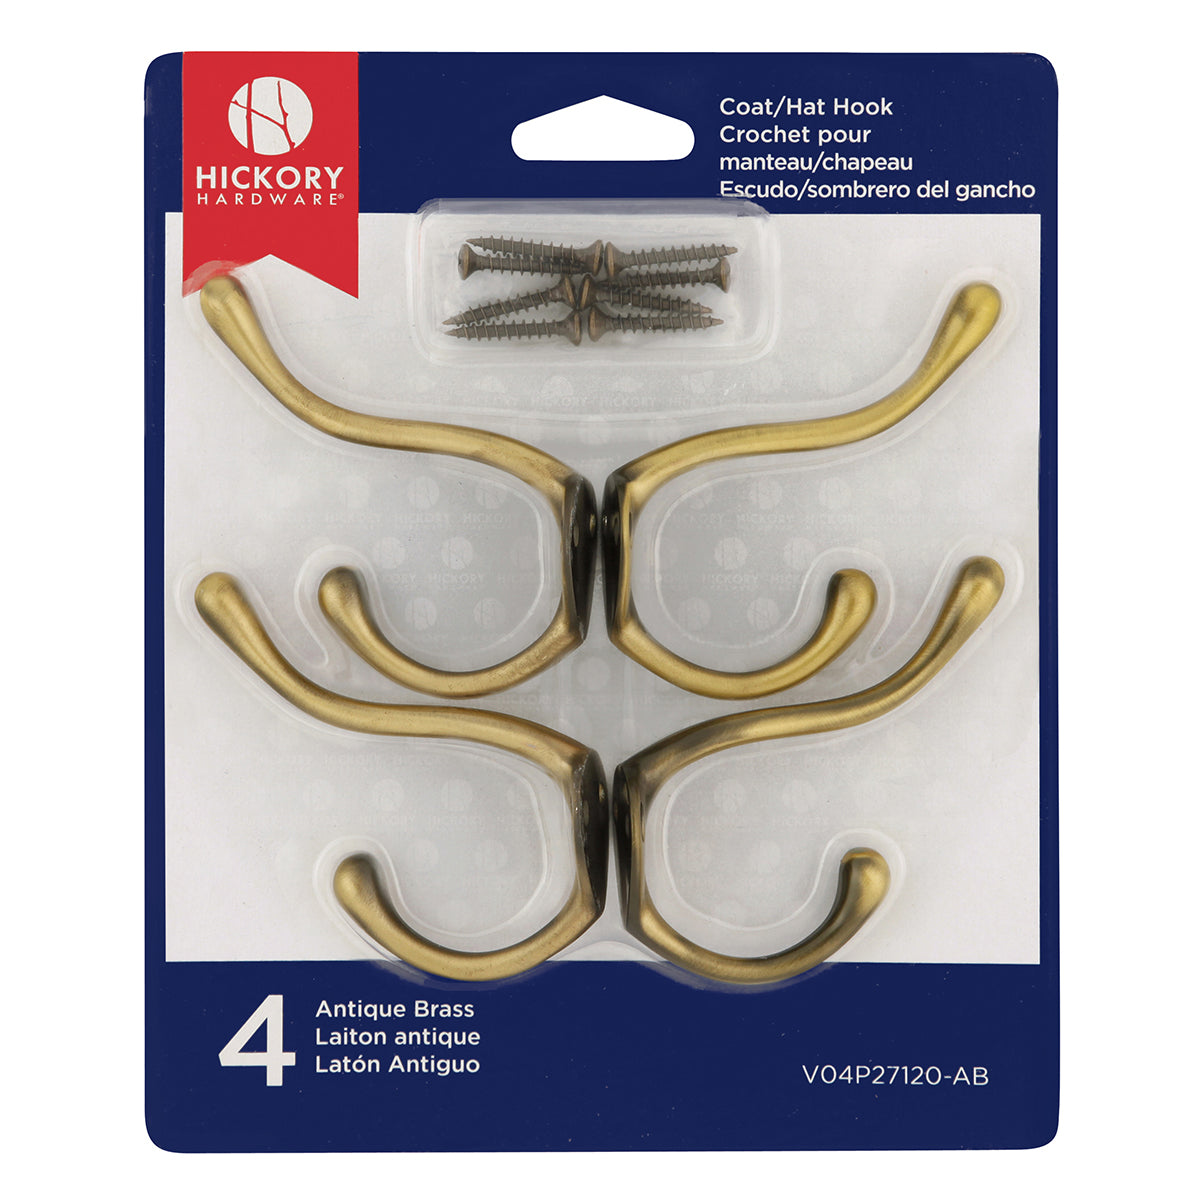 Double Coat Hooks 5/8 Inch Center to Center (4 Pack) - Hickory Hardware